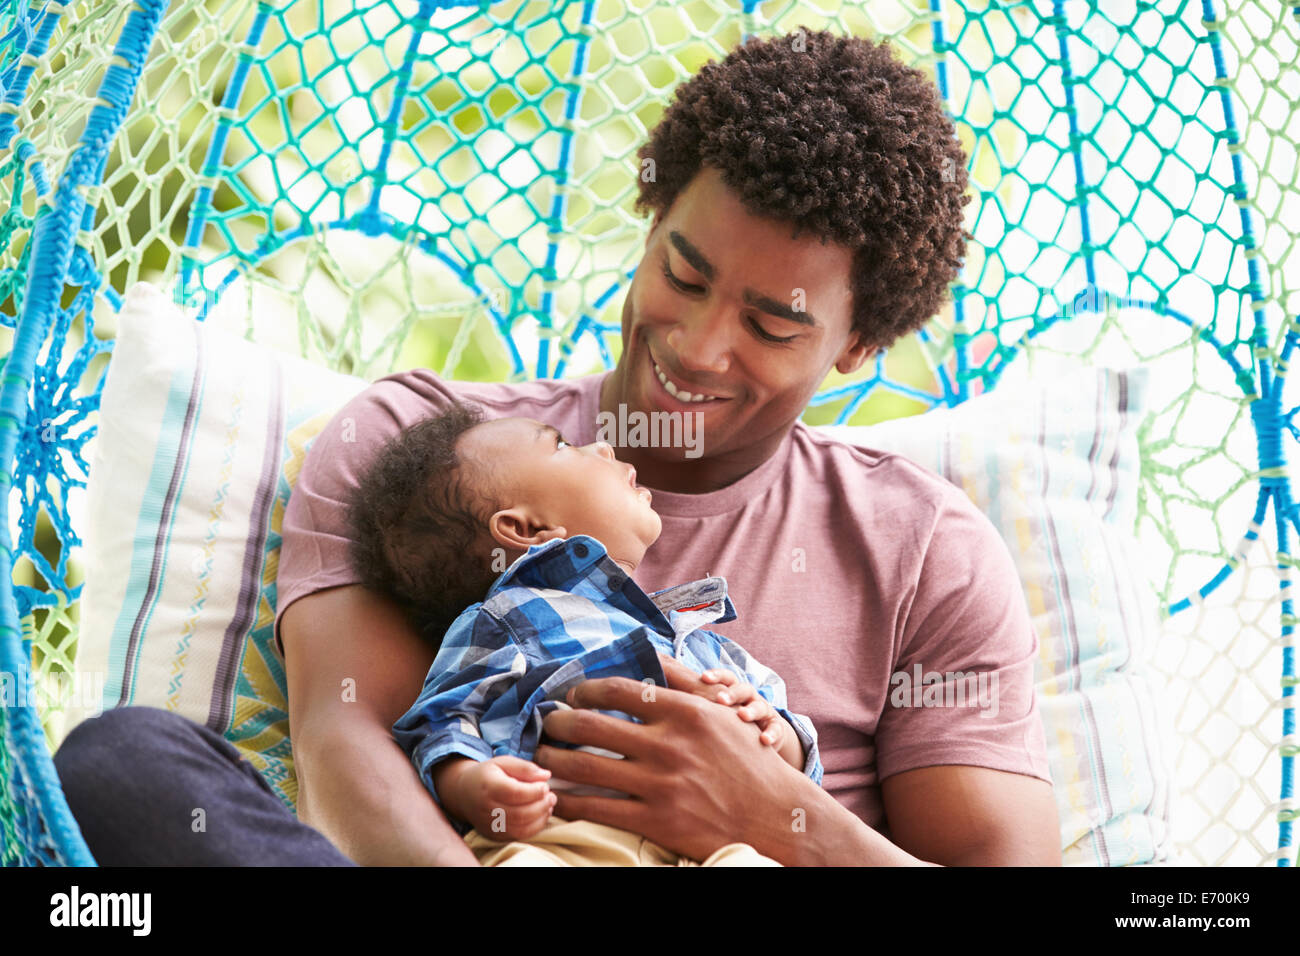 Father With Baby Son Relaxing On Outdoor Garden Swing Seat Stock Photo